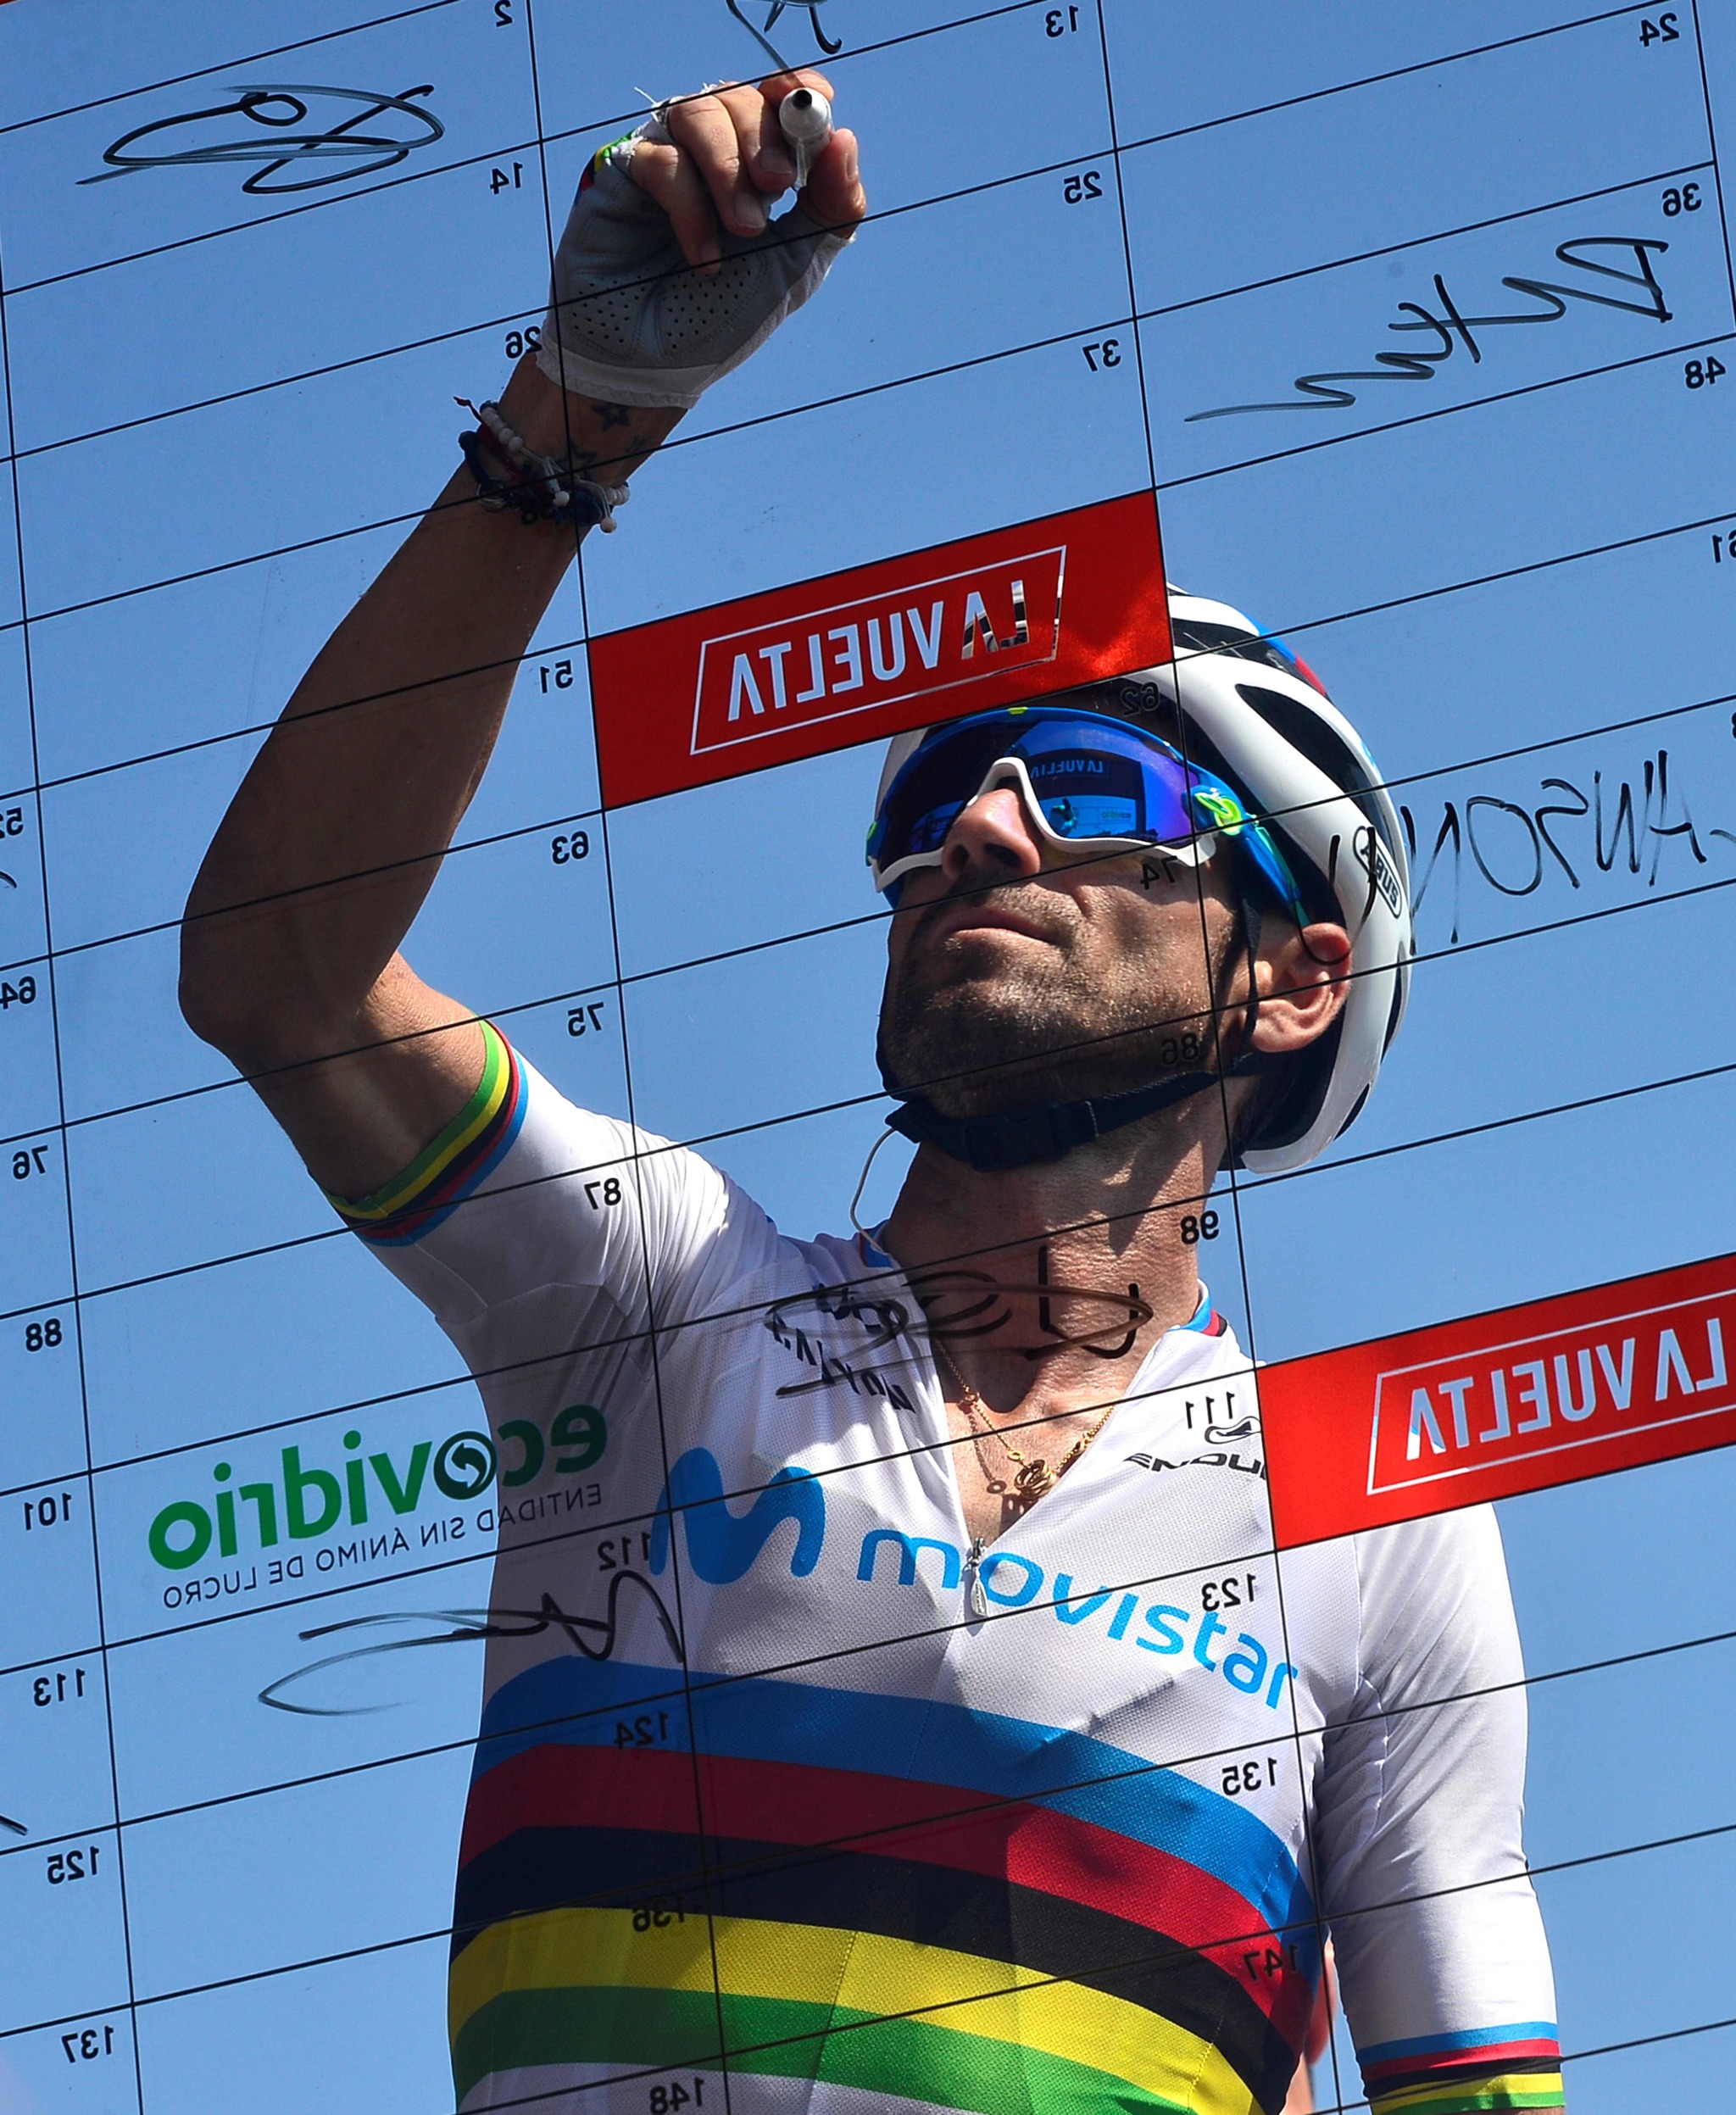 Team Movistar rider Spains <HIT>Alejandro</HIT><HIT>Valverde</HIT> signs a board before the eighth stage of the 2019 La Vuelta cycling tour of Spain, a 166,9 km race from Valls to Igualada on August 31, 2019 in Igualada. (Photo by JOSE JORDAN / AFP)